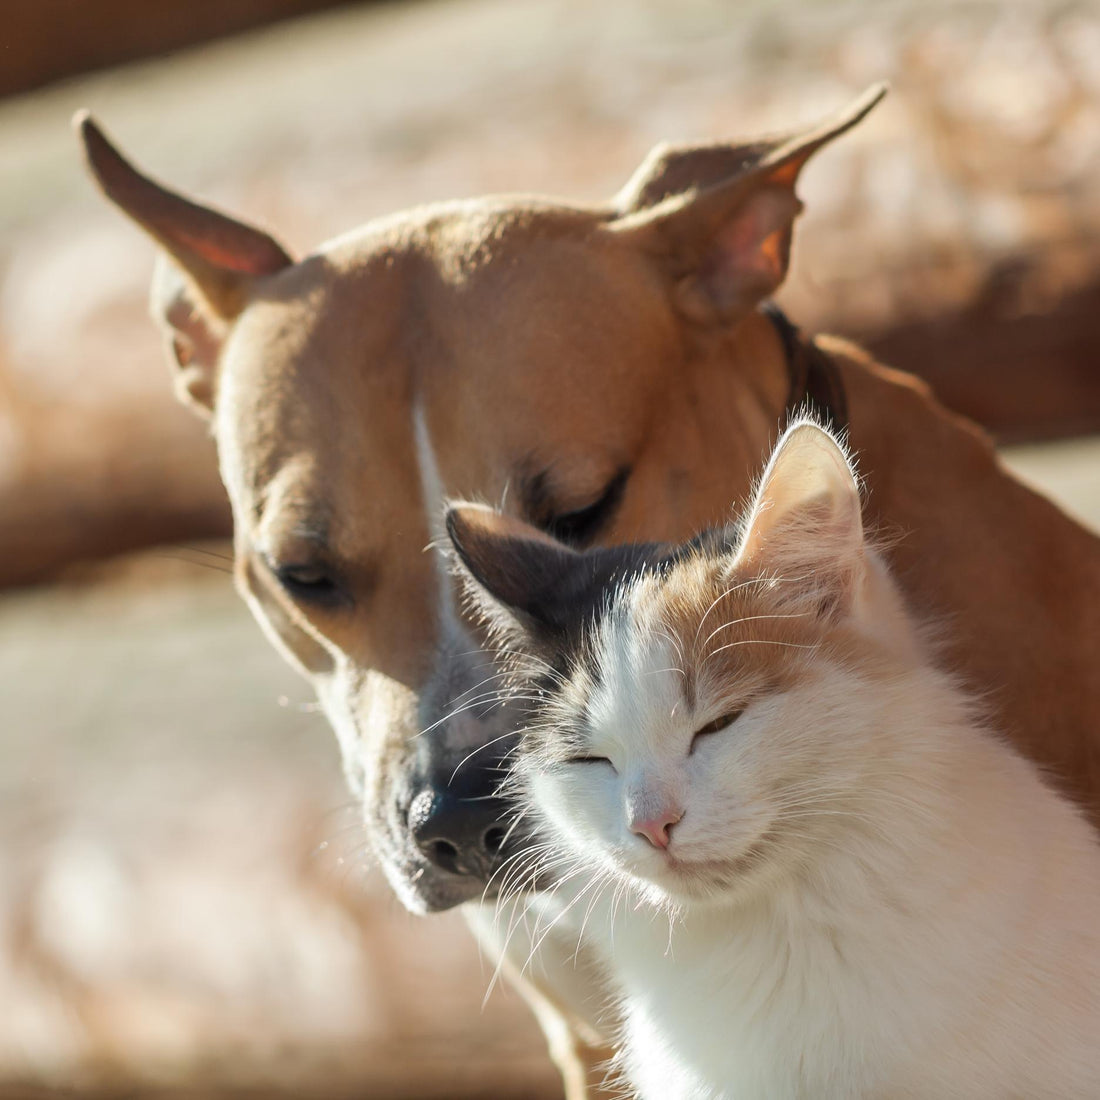 Nurturing Amicable Co-existence between Cats and Dogs